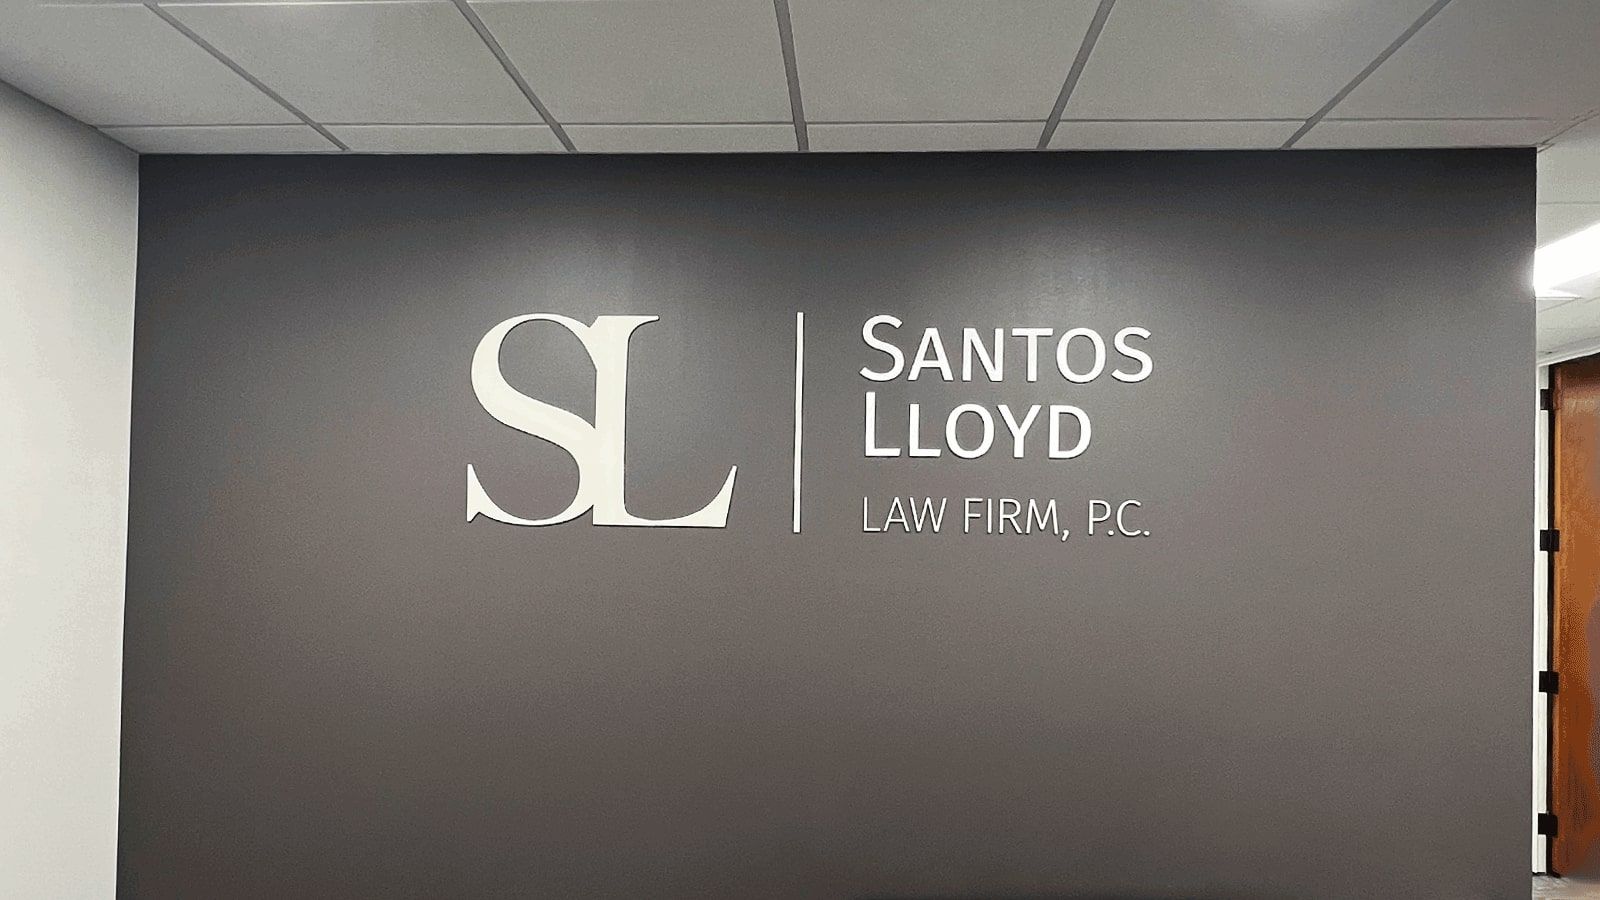 Santos Lloyd Law Firm, PC acrylic signs set up on the wall